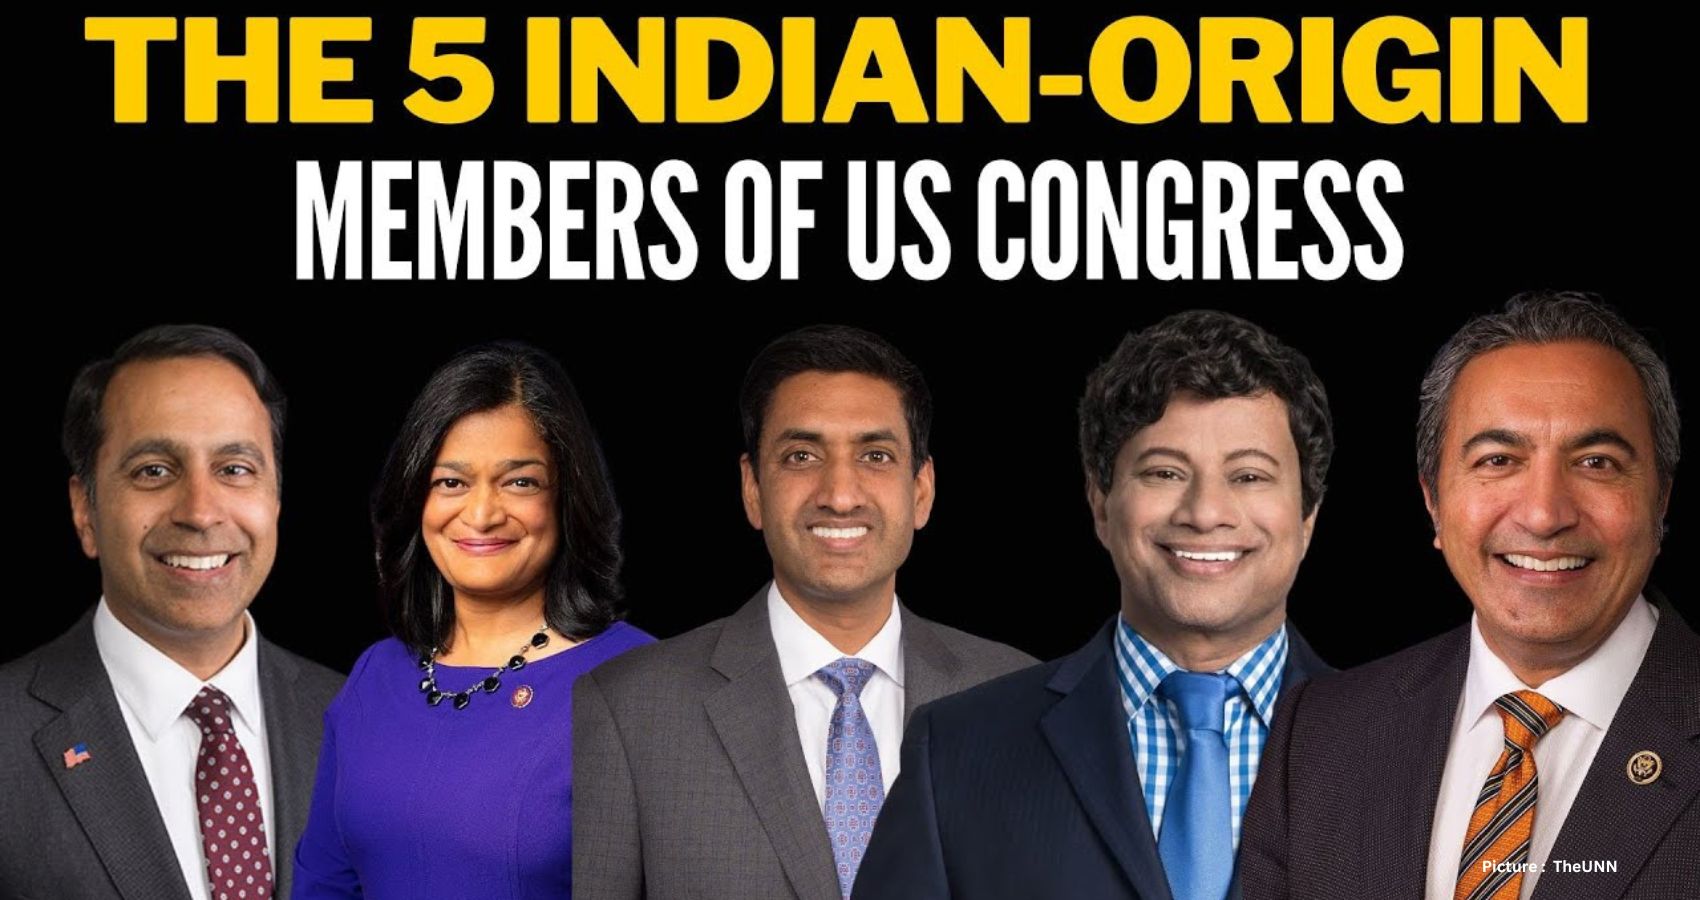 Featured & Cover The Coming of Age of Indian Americans 2